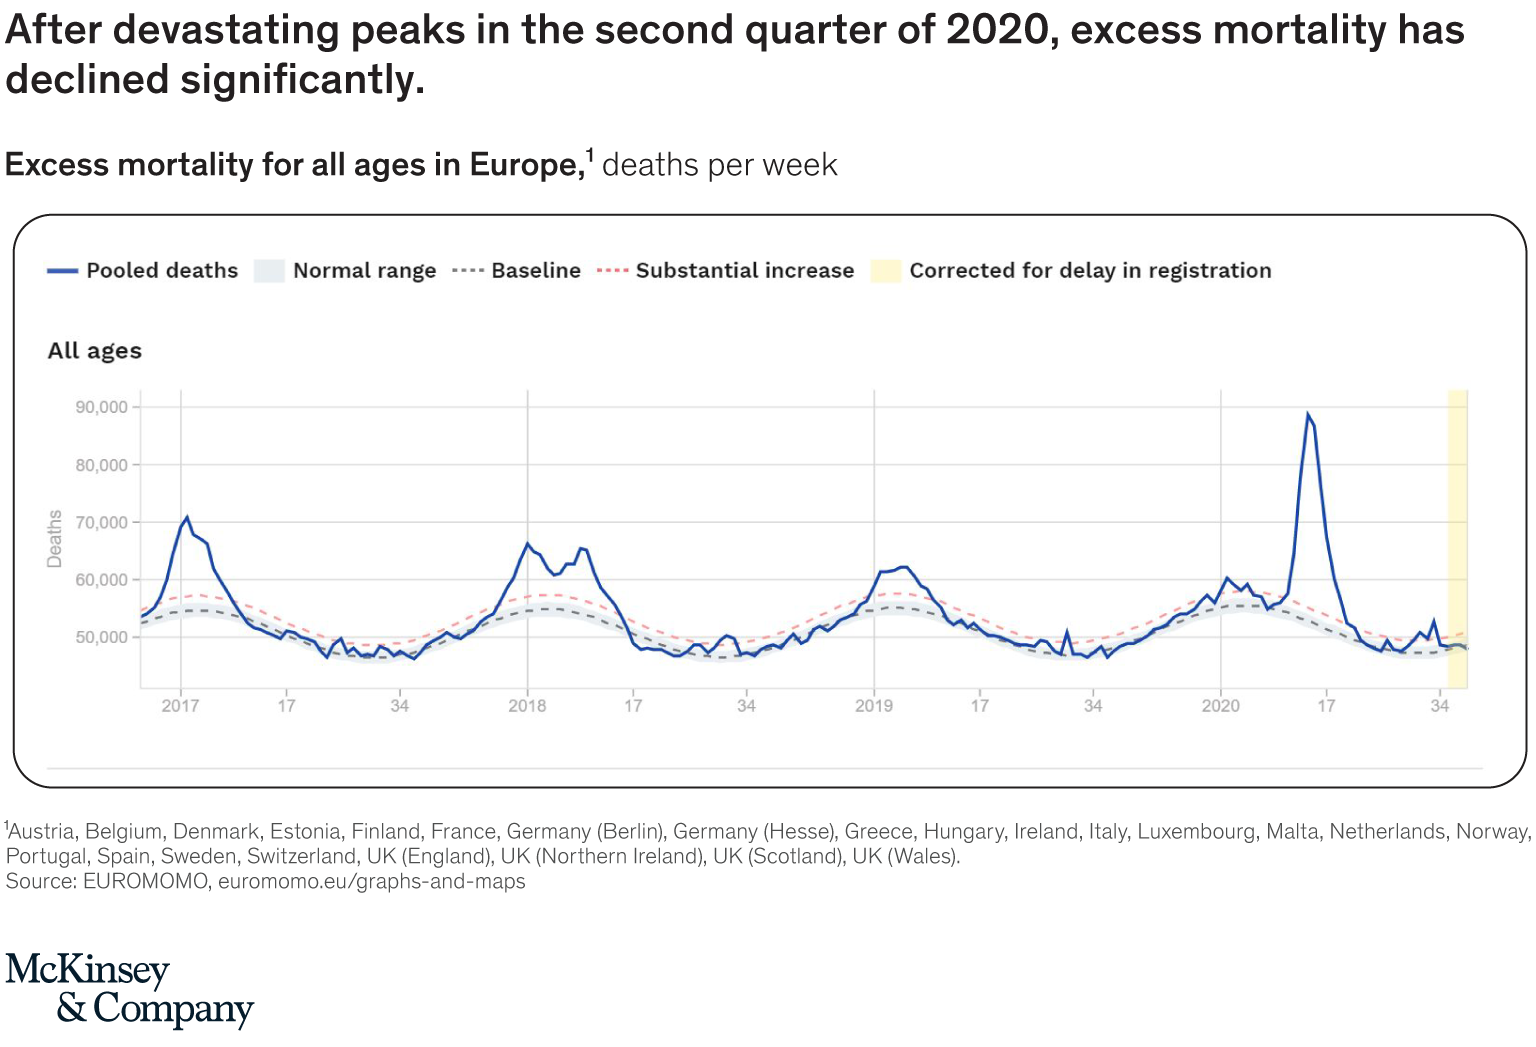 After devastating peaks in the second quarter of 2020, excess mortality has declined significantly.